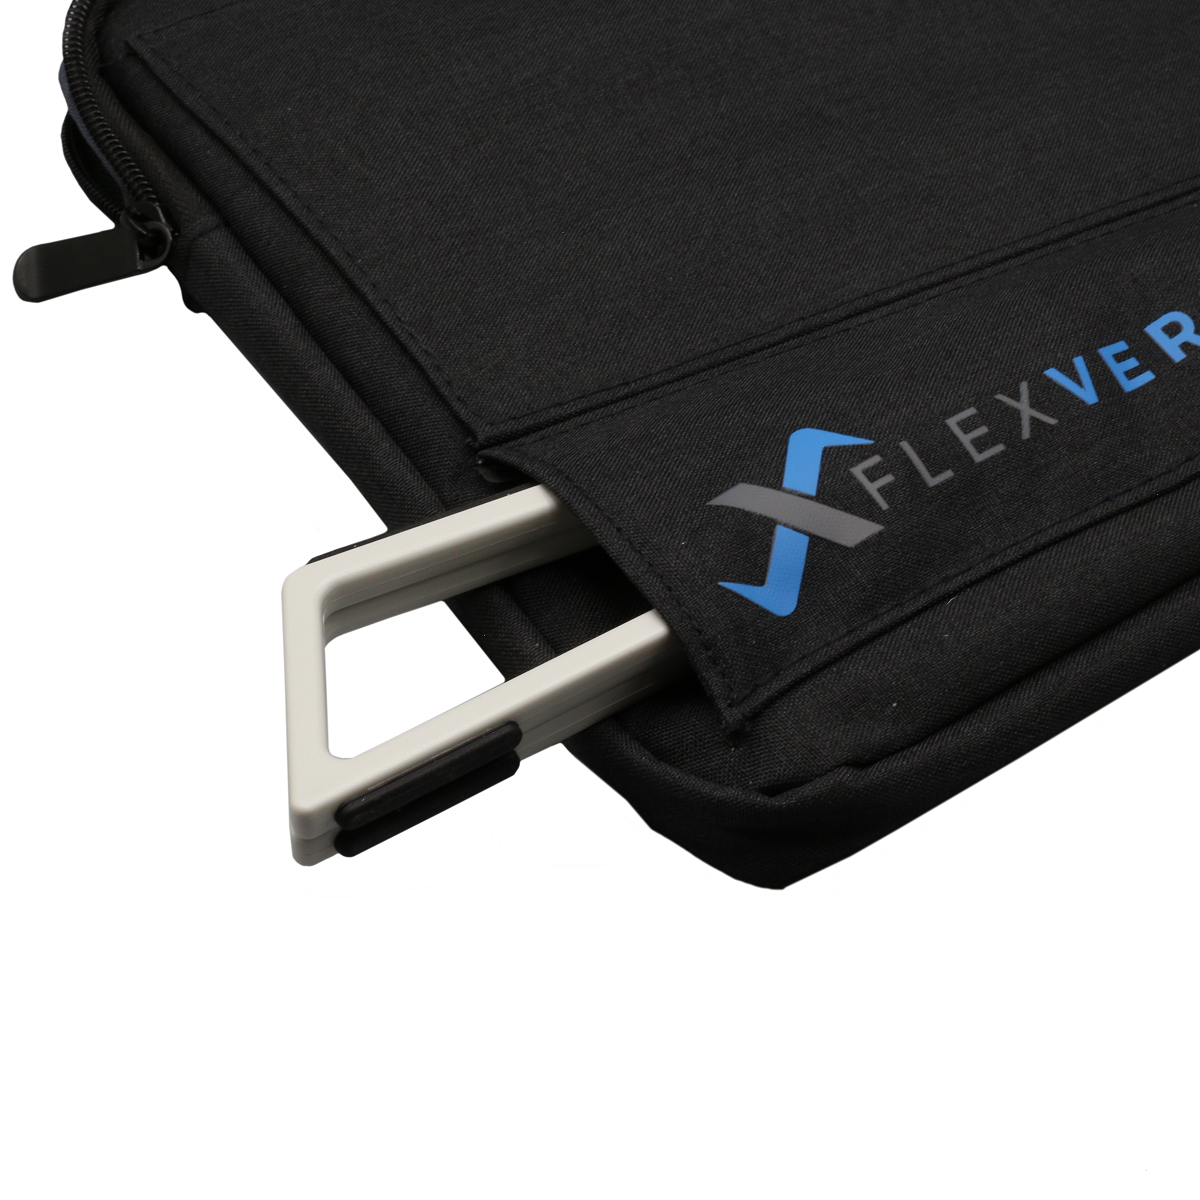 The FlexVerk Laptop Stand shown in Pearl White inserted into a gray FlexVerk Laptop Sleeve shown on a white background.